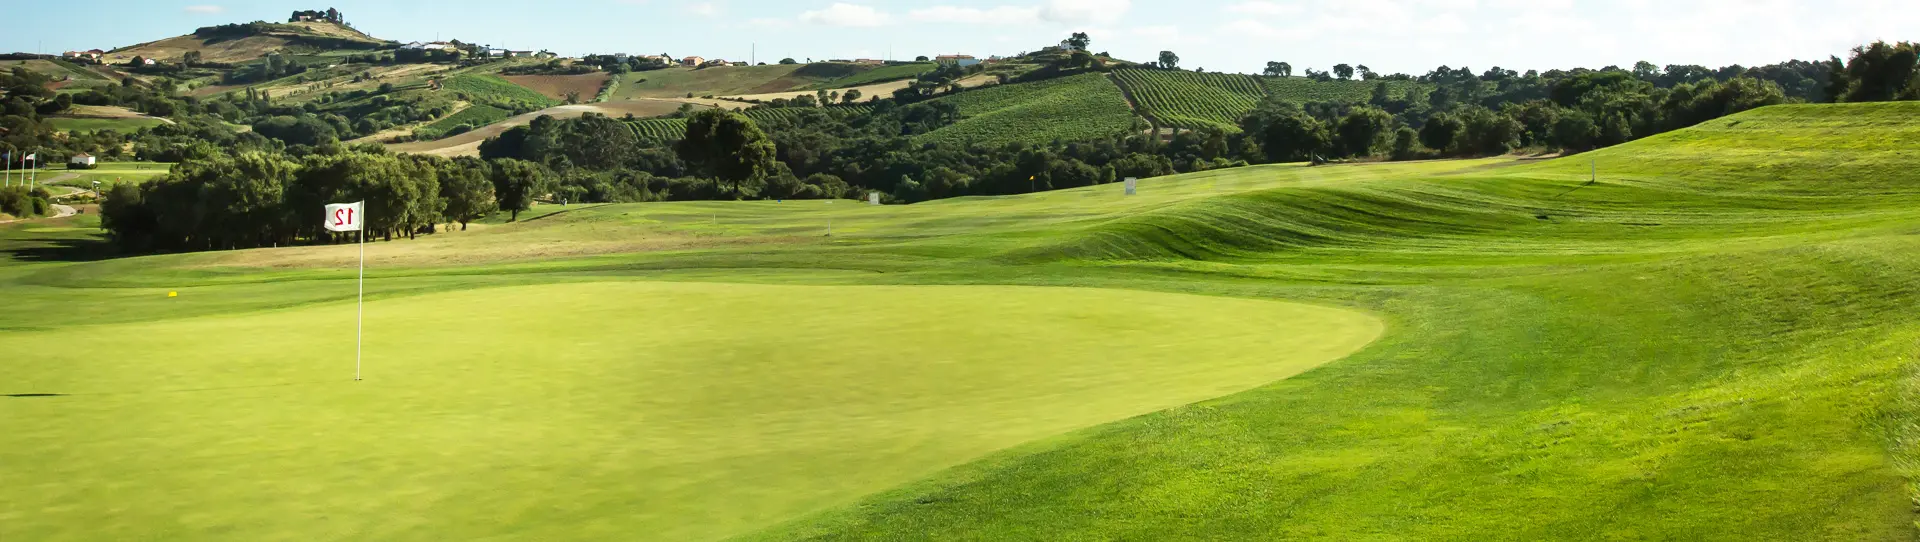 Portugal golf courses - Dolce Campo Real - Photo 1